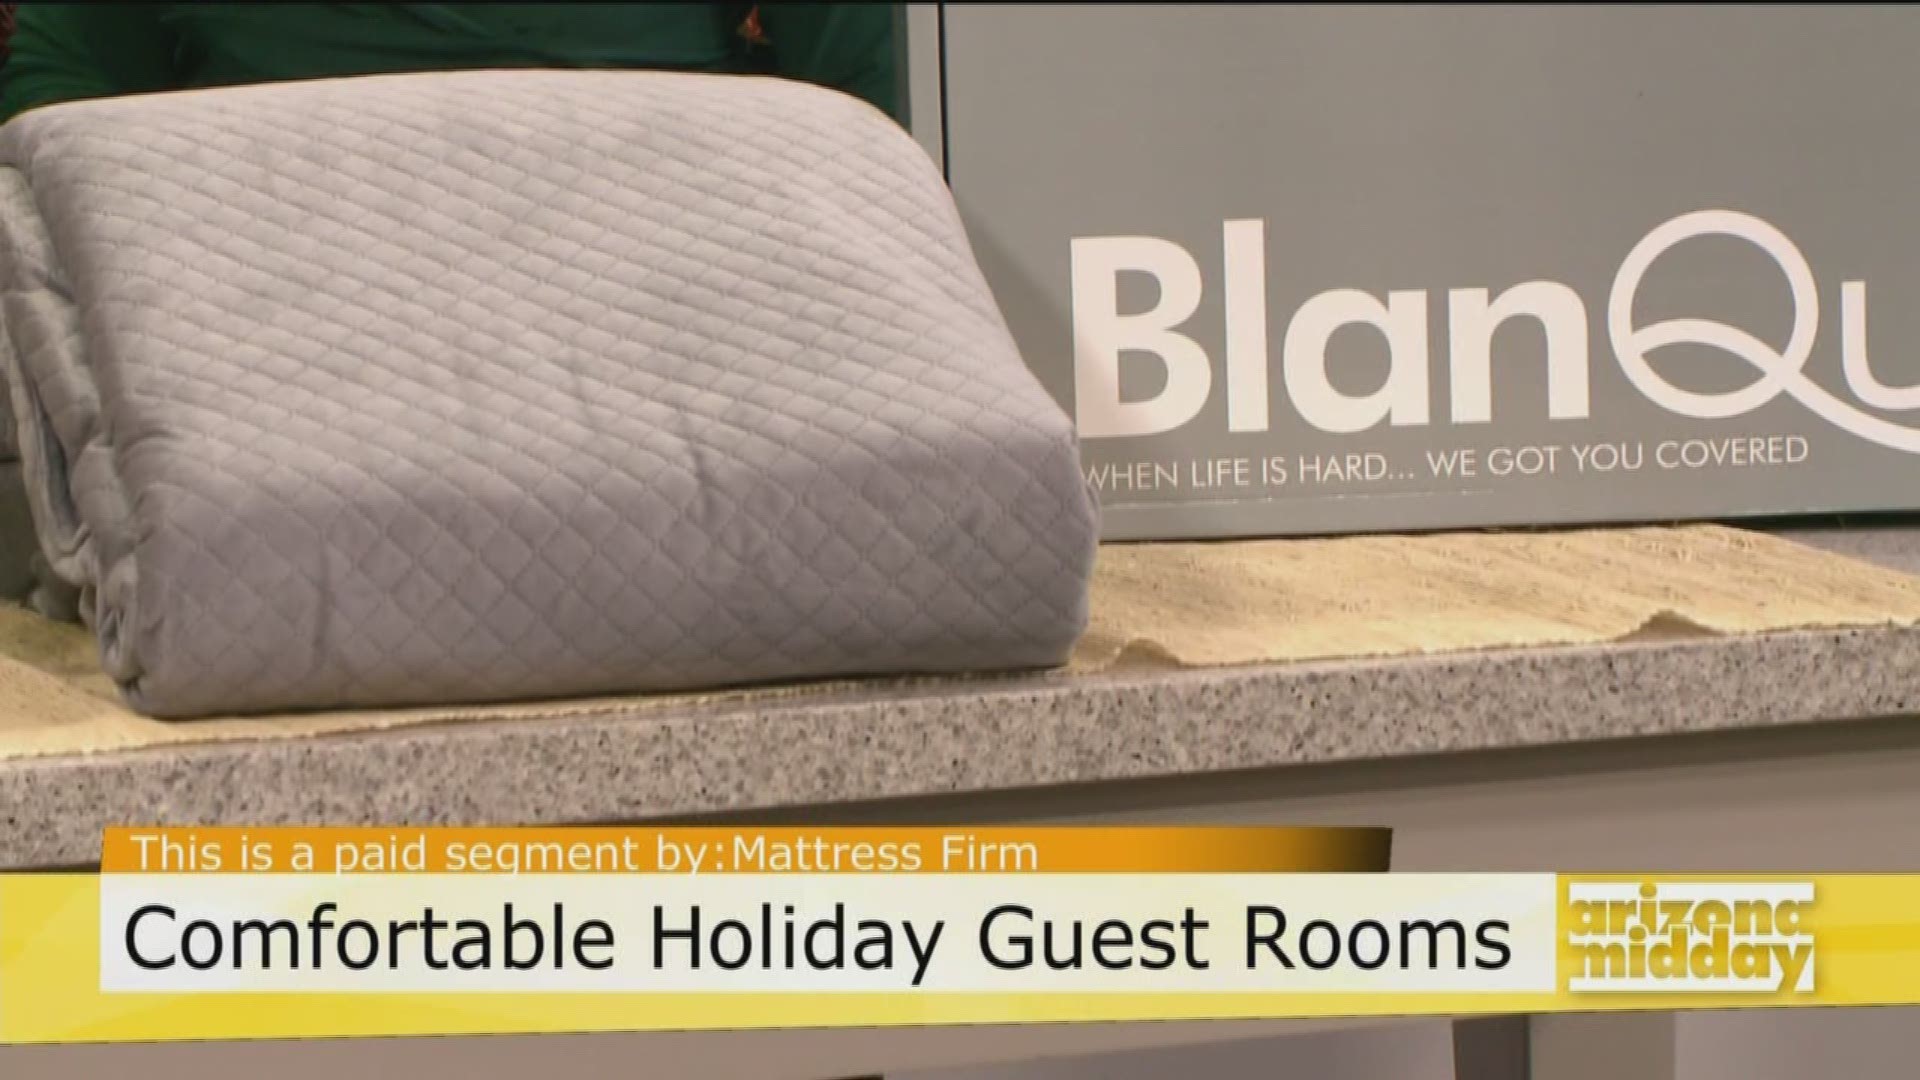 Lifestyle Expert Amy Sewell shows us how to create a comfortable guest room with the help of Mattress Firm this holiday season plus how to get an amazing deal